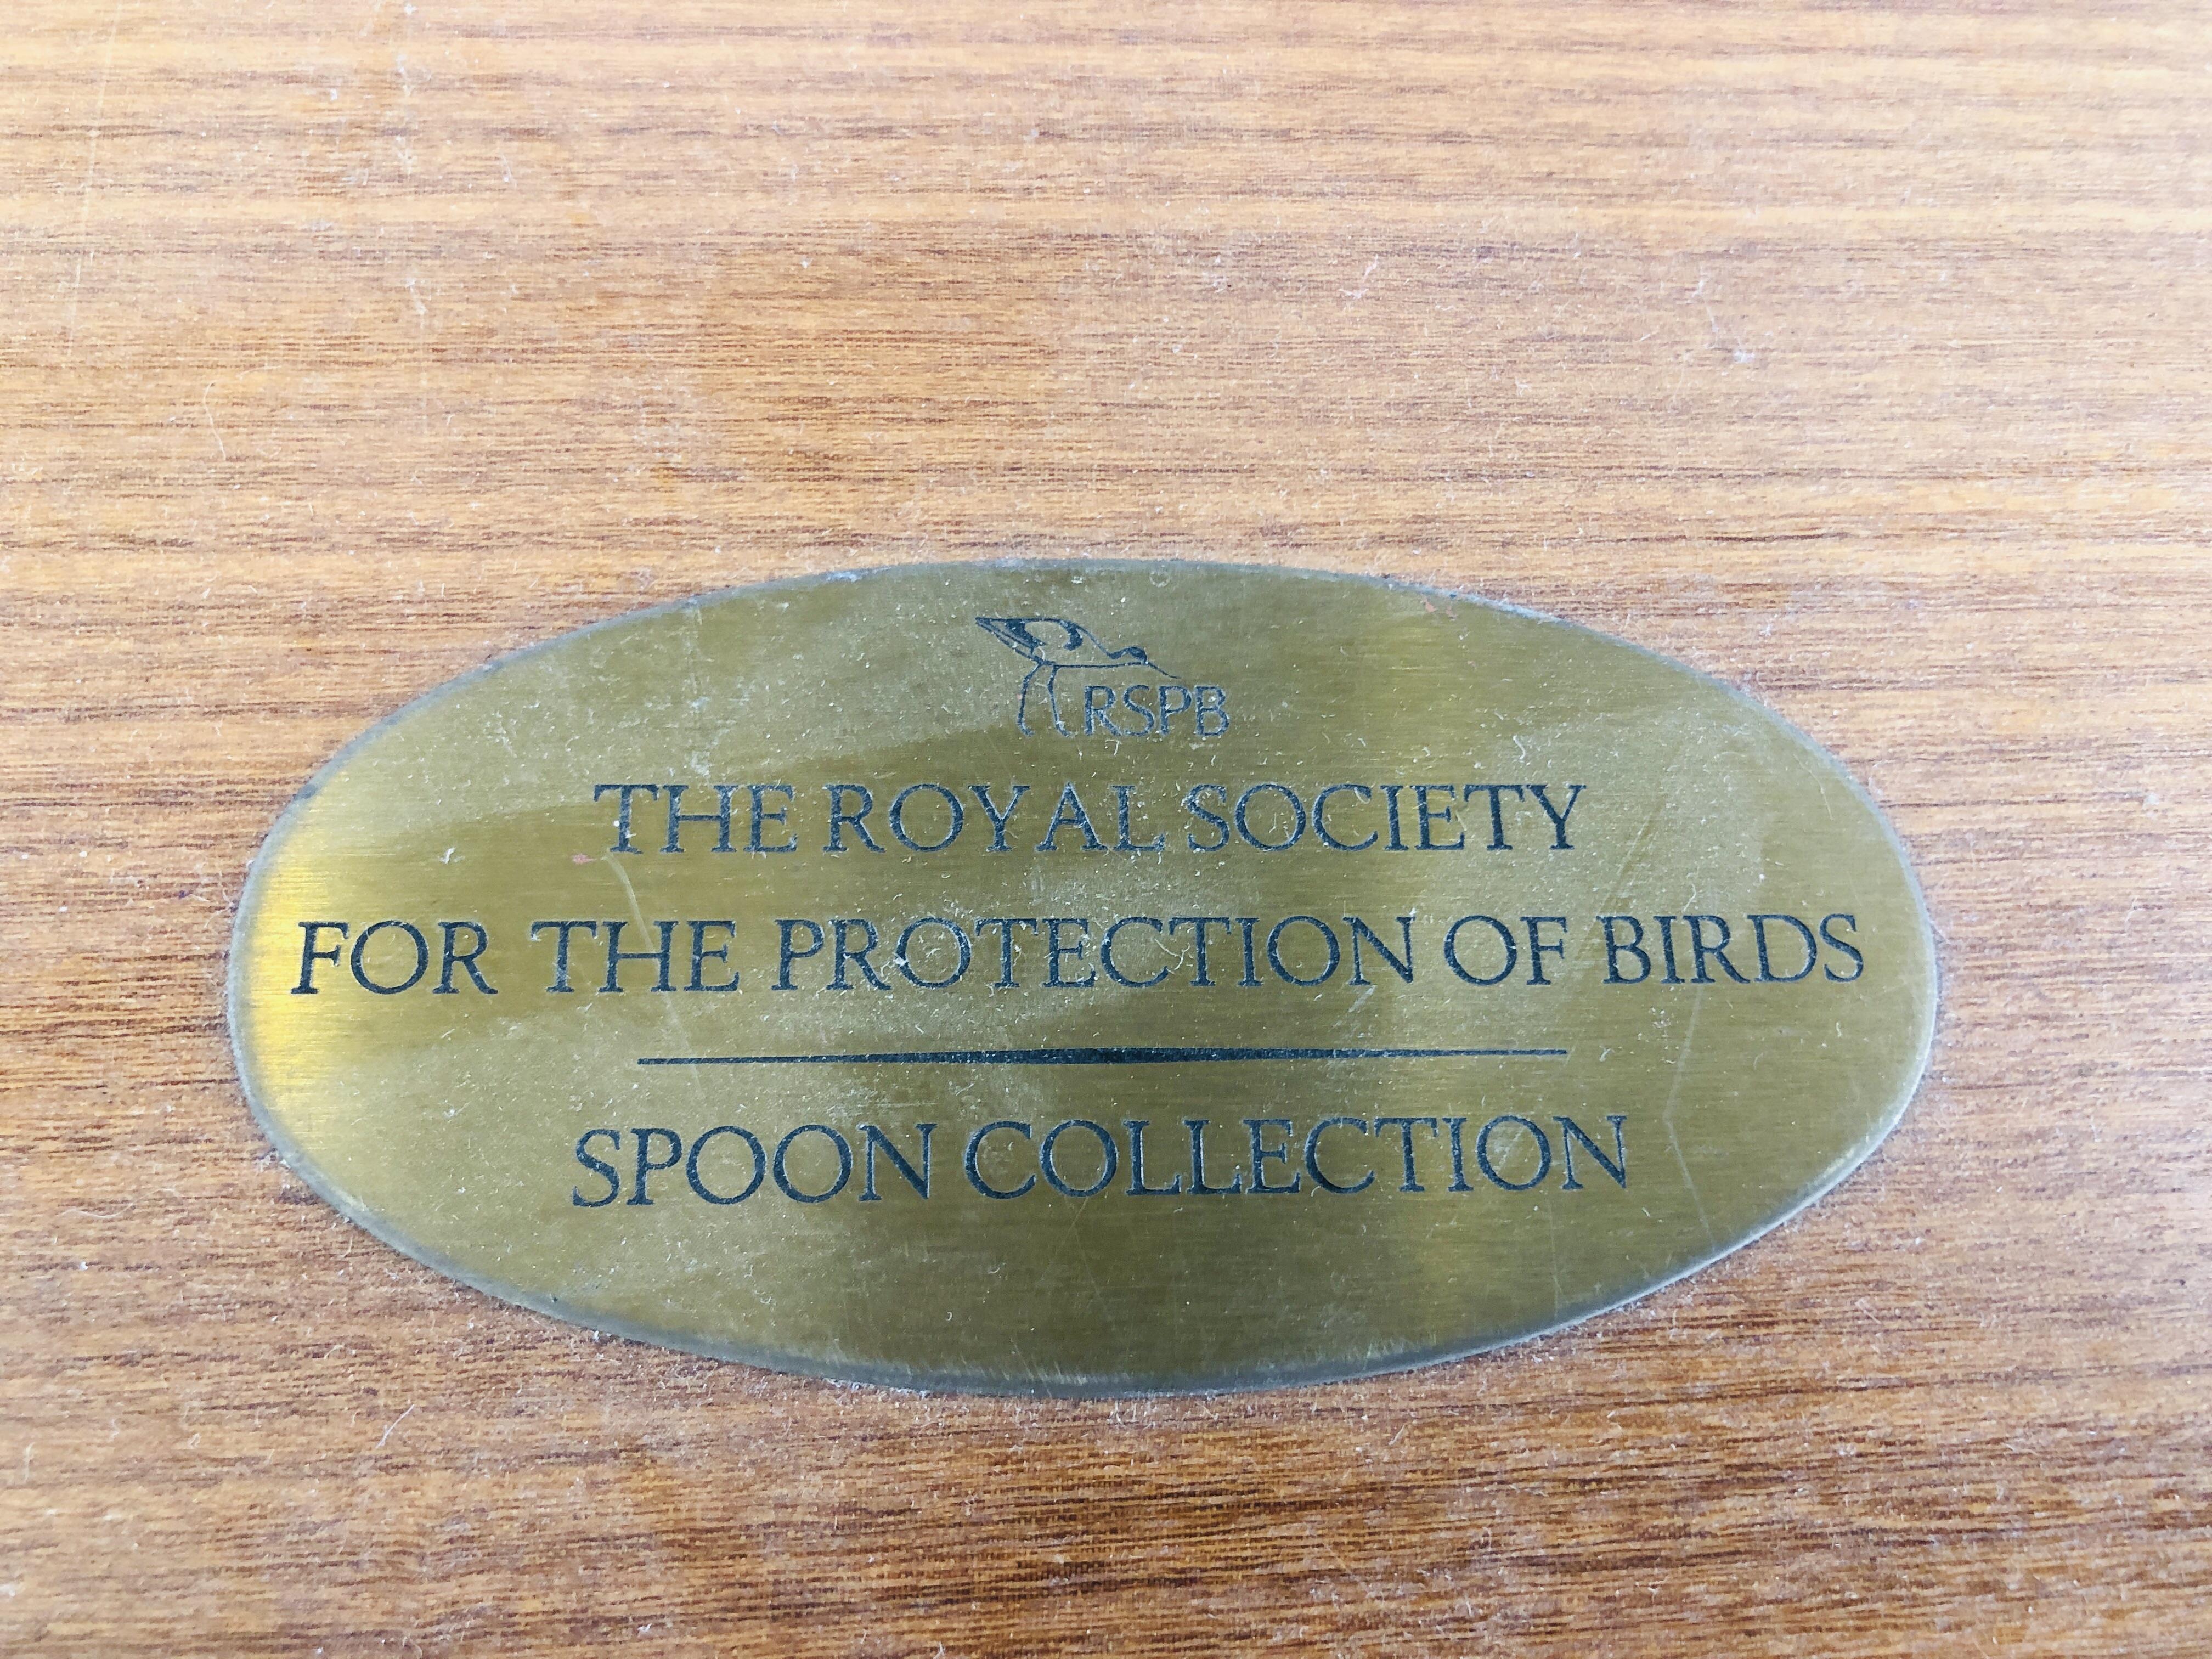 AN RSPB SILVER SPOON COLLECTION, J PINCHES LON 1975, 12 SPOONS. - Image 11 of 11